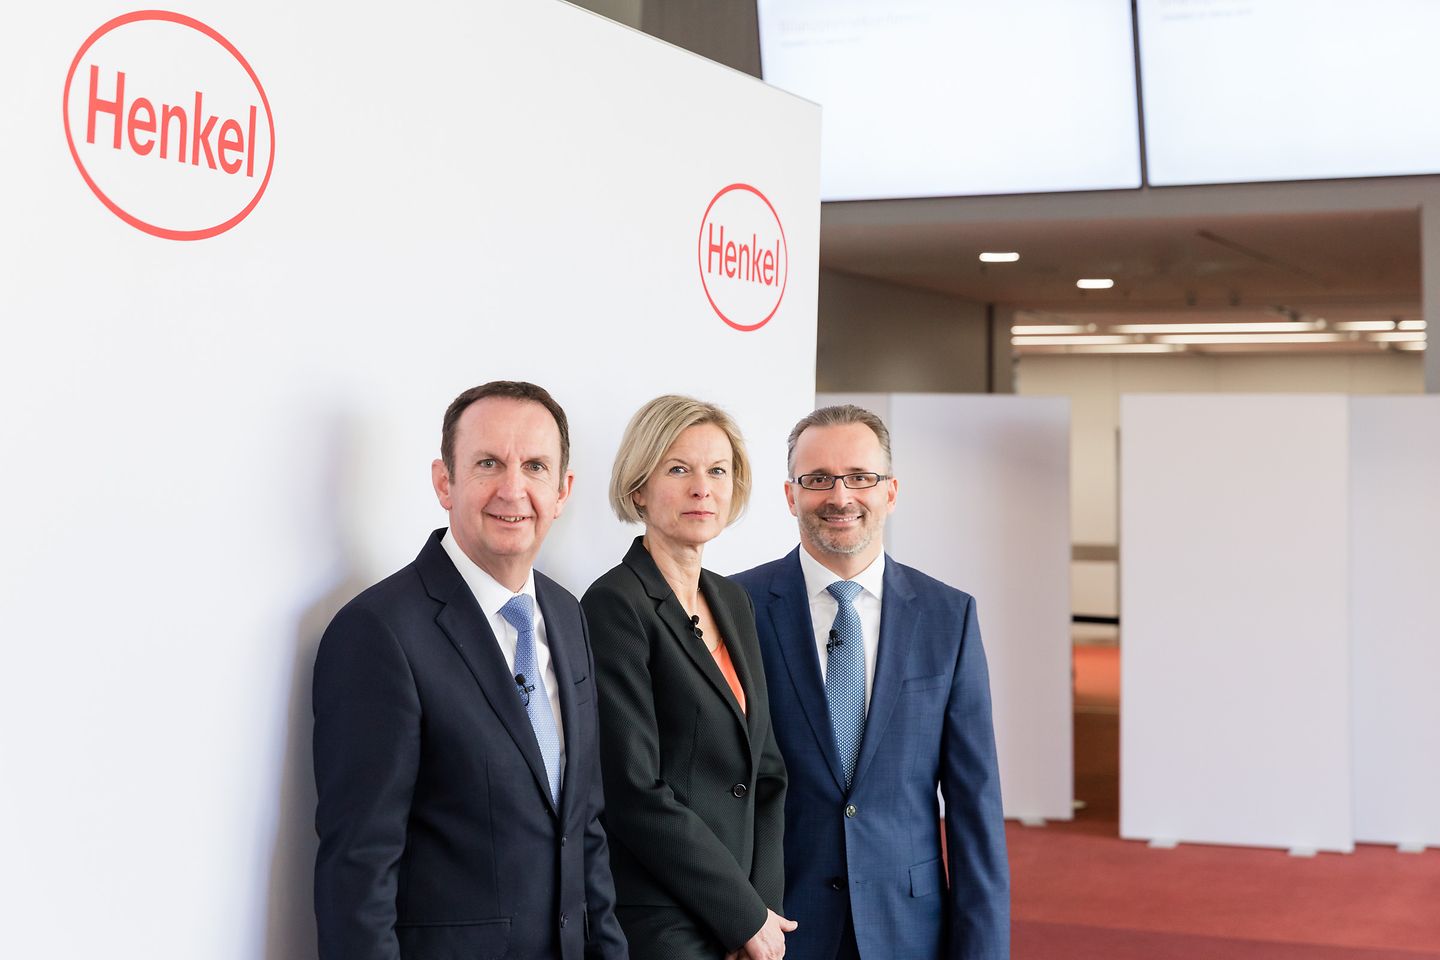 
At the annual results press conference: CEO Hans Van Bylen, Kathrin Menges, Executive Vice President Human Resources, and CFO Carsten Knobel (from left)